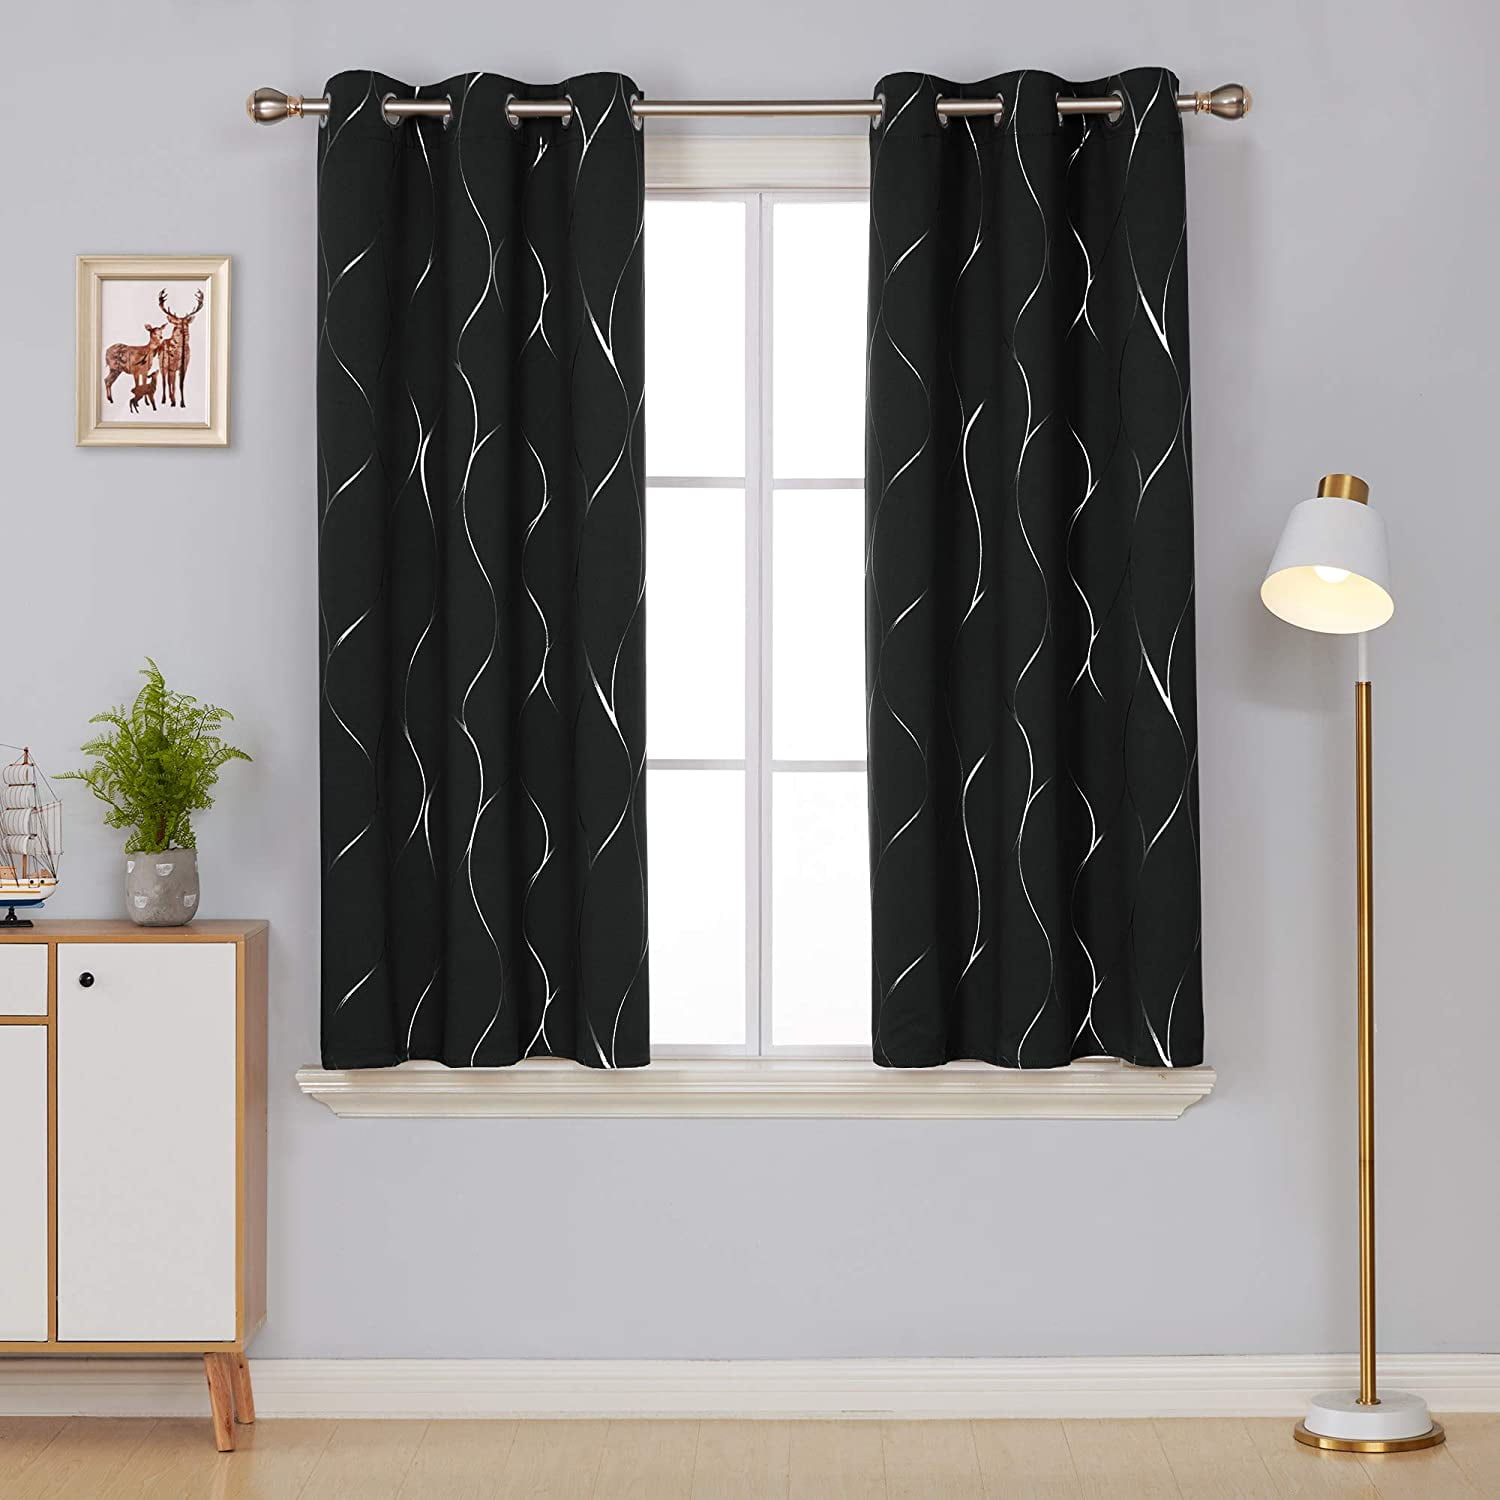 Deconovo Thermal Insulated Blackout Super Soft Eyelet Curtains 2 Panels 